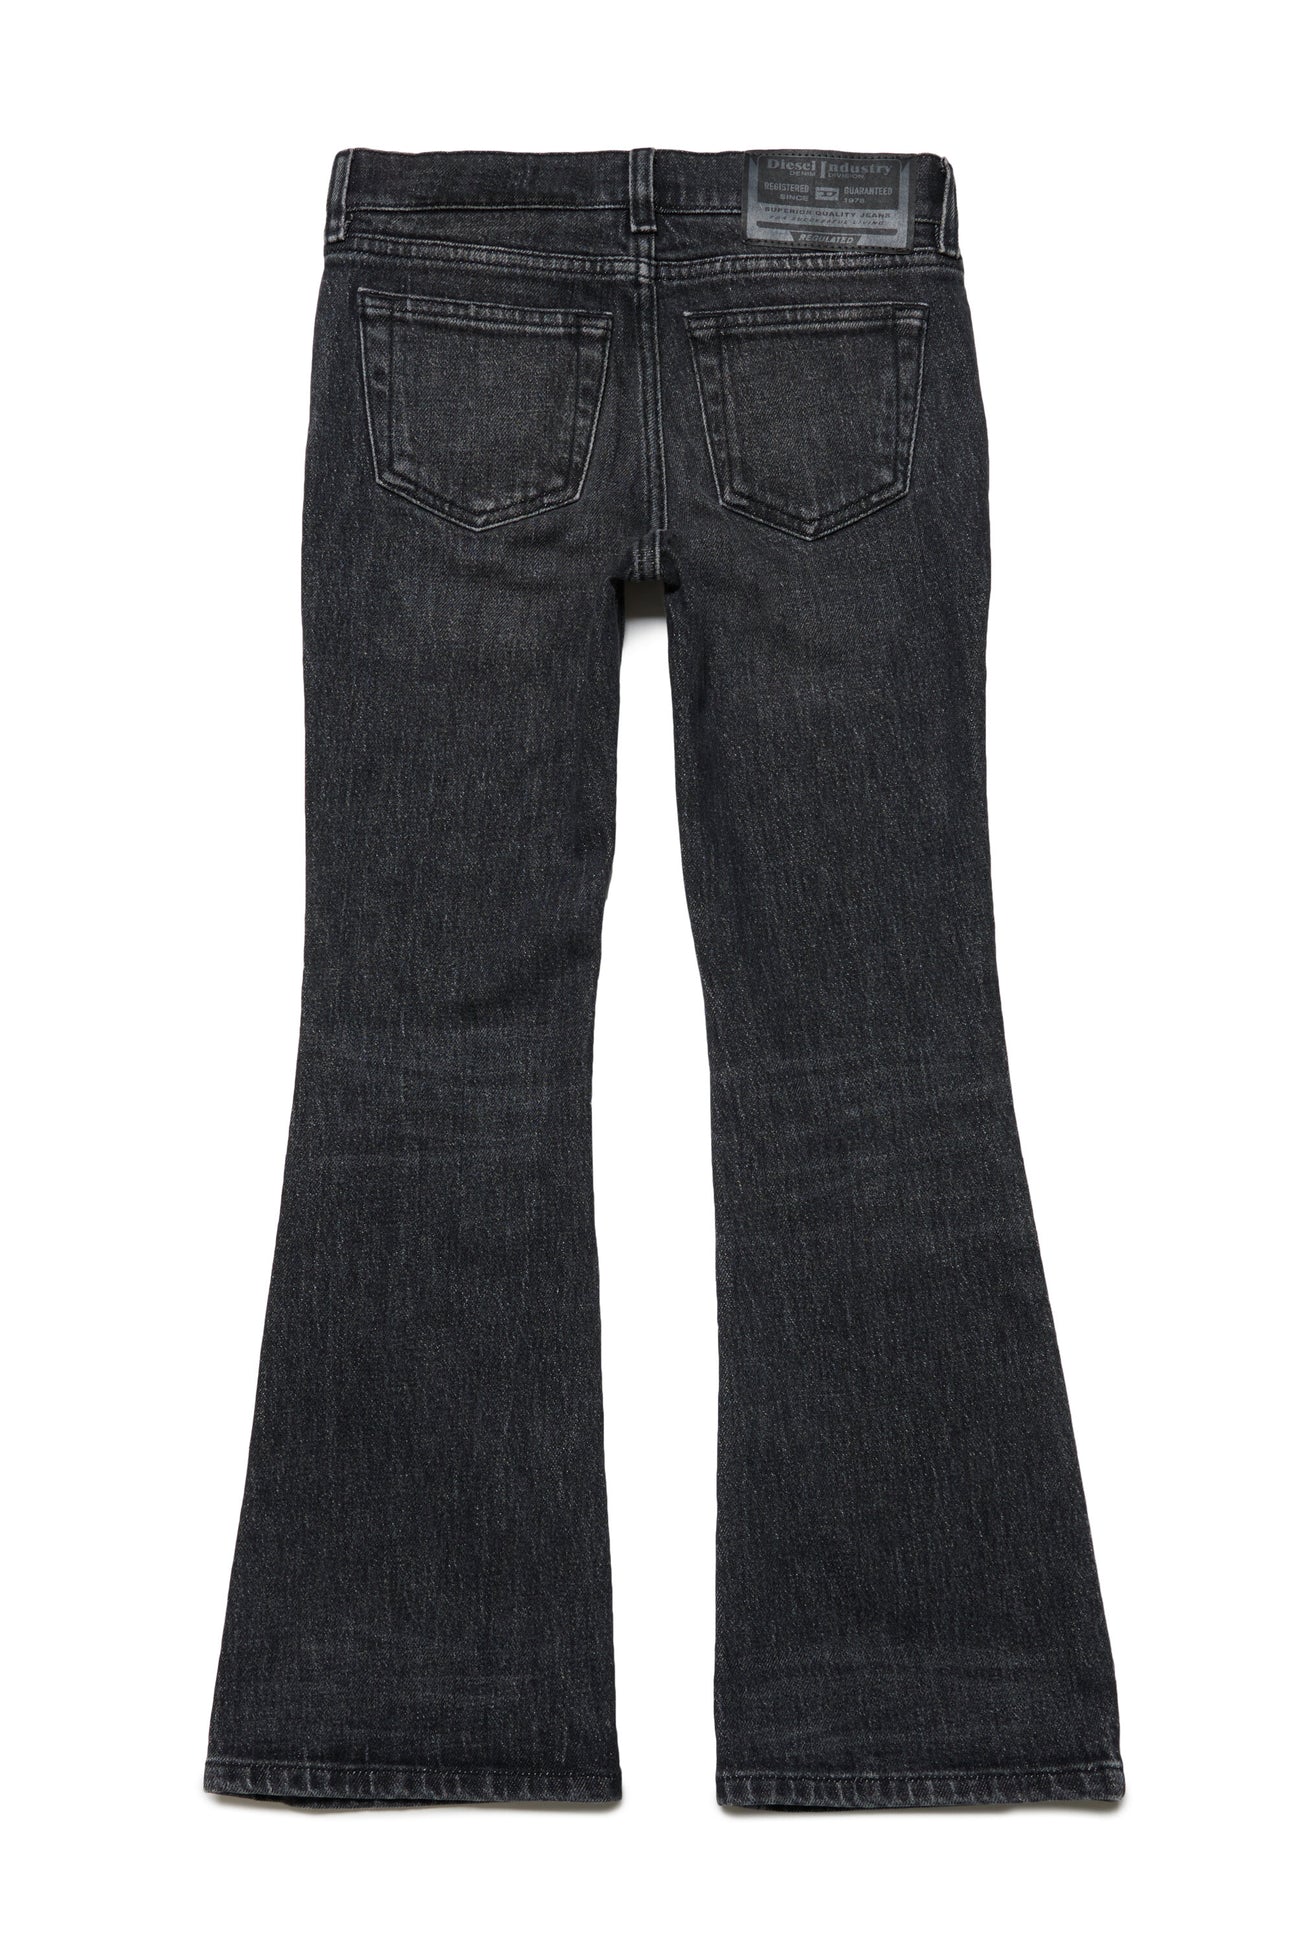 Black bootcut jeans with buckle - 1969 D-Ebbey Black bootcut jeans with buckle - 1969 D-Ebbey